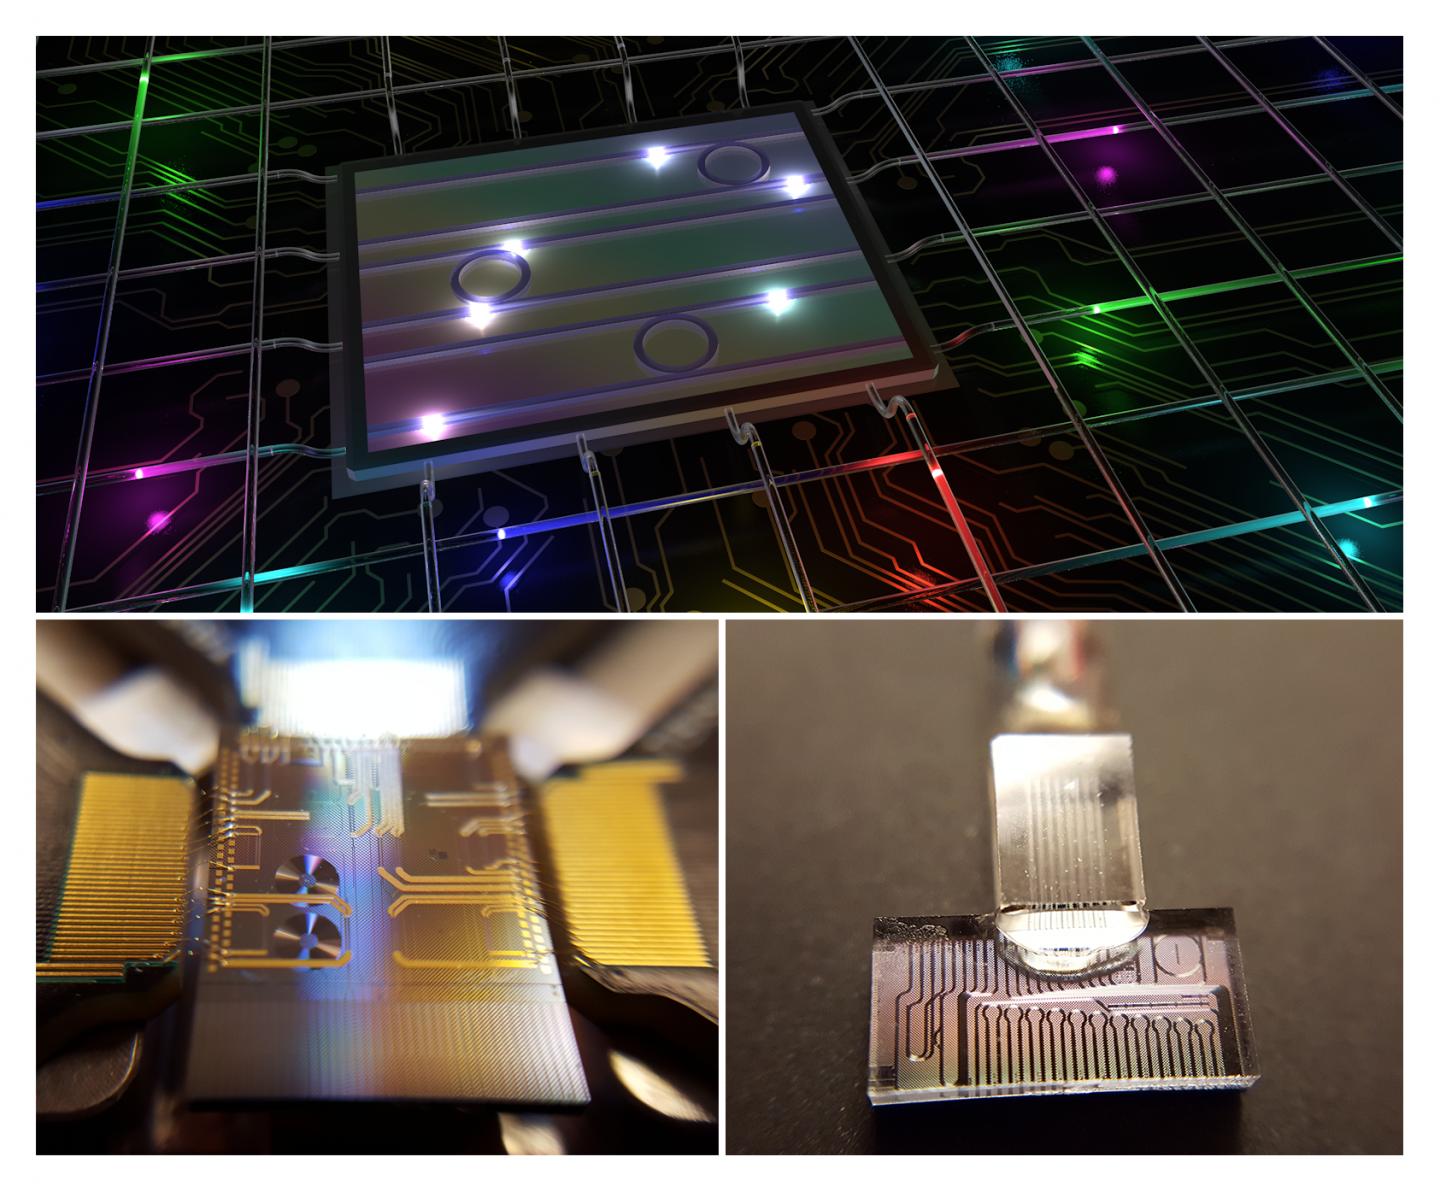 High-Dimensional Color-Entangled Photon States from a Photonic Chip